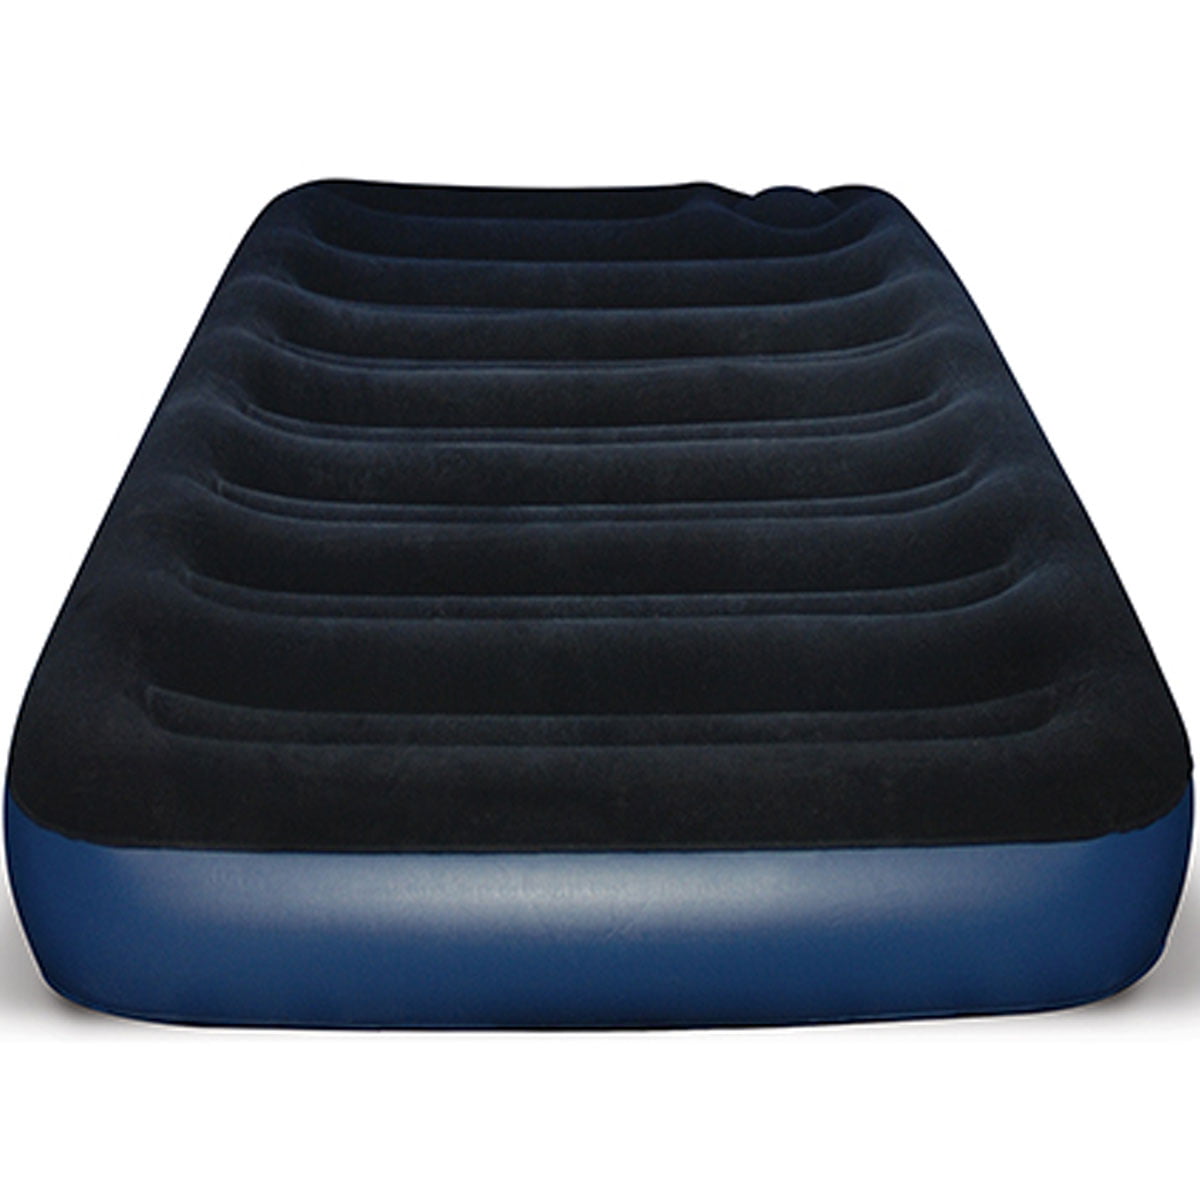 Sable Double Size Air Bed with Built-in Electric Pump and Pillow Inflatable Air Mattress Comfortable Flocked Top 228 x 152 x 43 cm